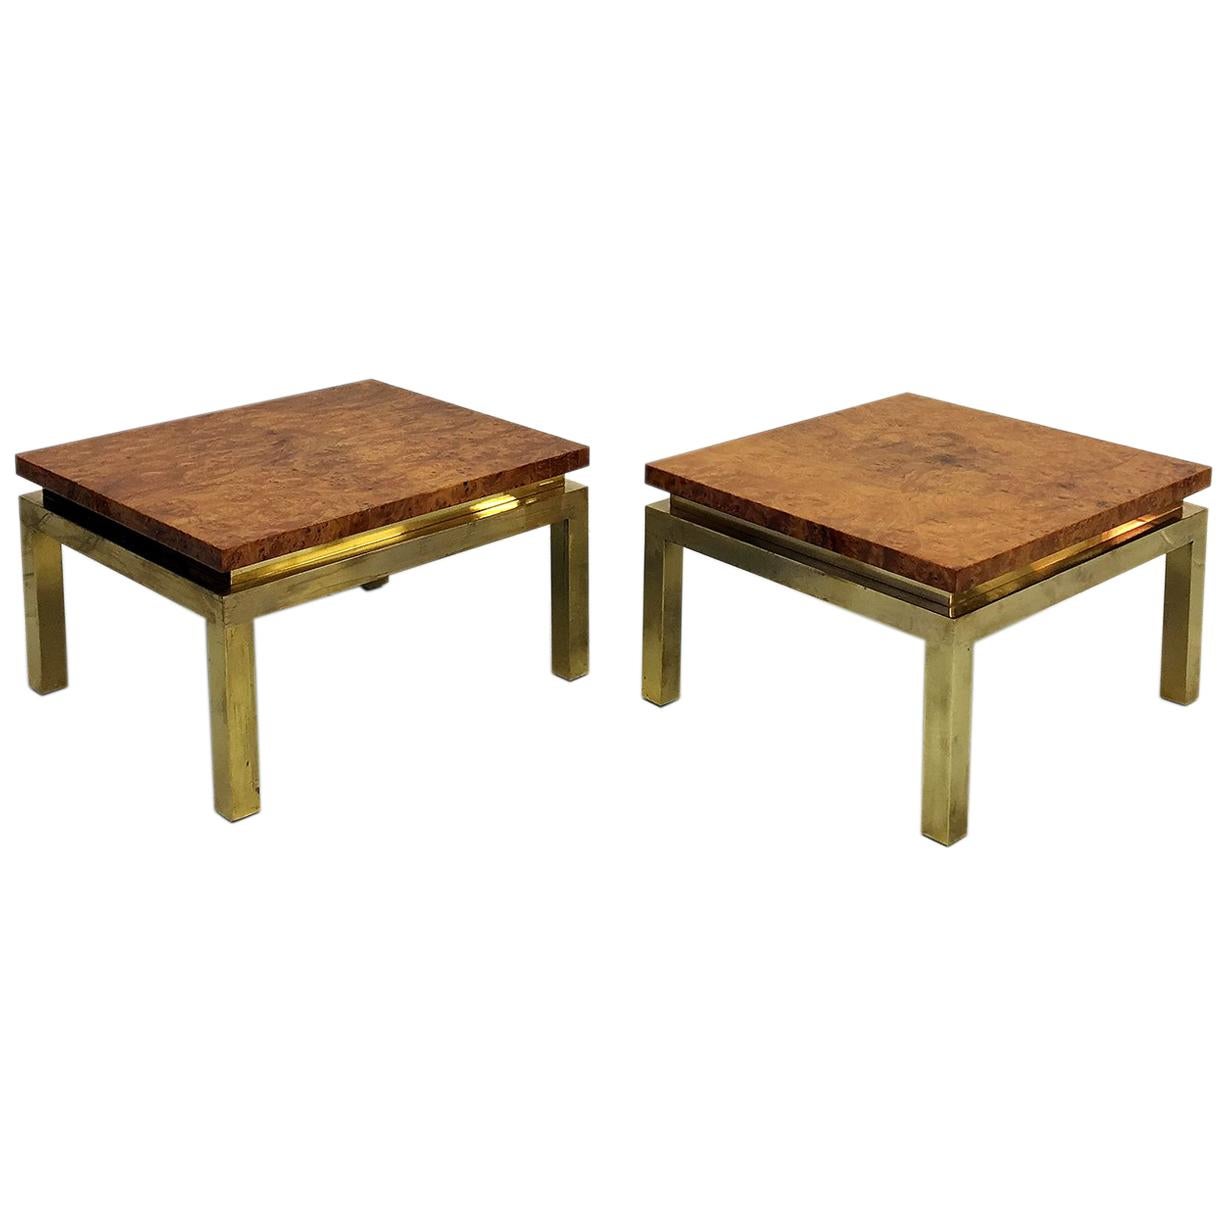 Pair of 1970s Burr Walnut and Brass Side Tables by Guy Lefevre for Maison Jansen